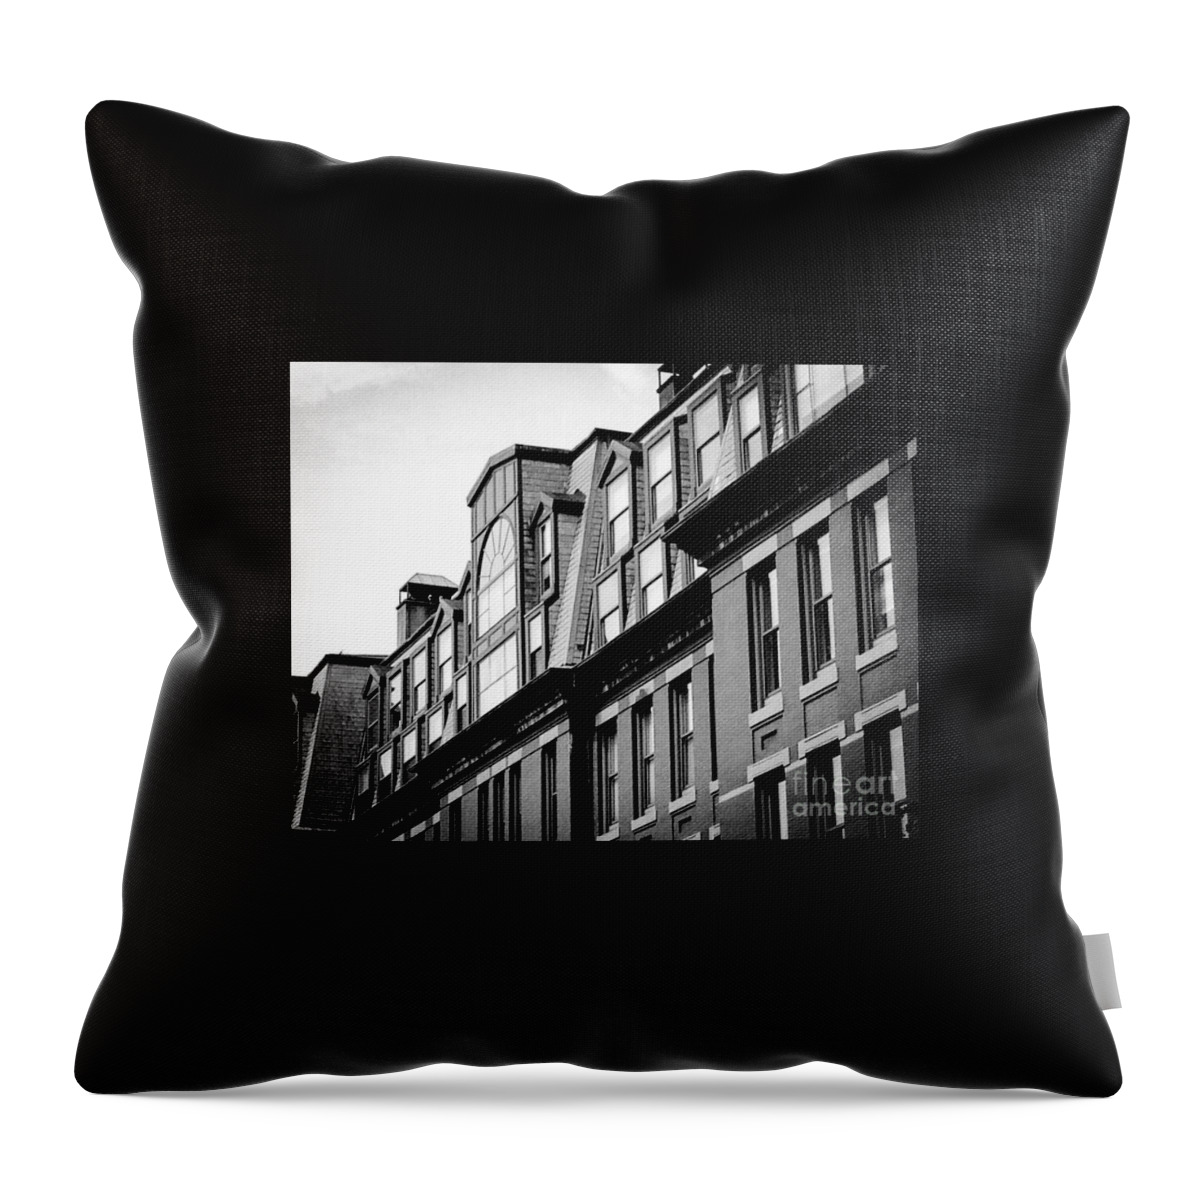 Black And White Throw Pillow featuring the photograph Black and white Boston by Deena Withycombe